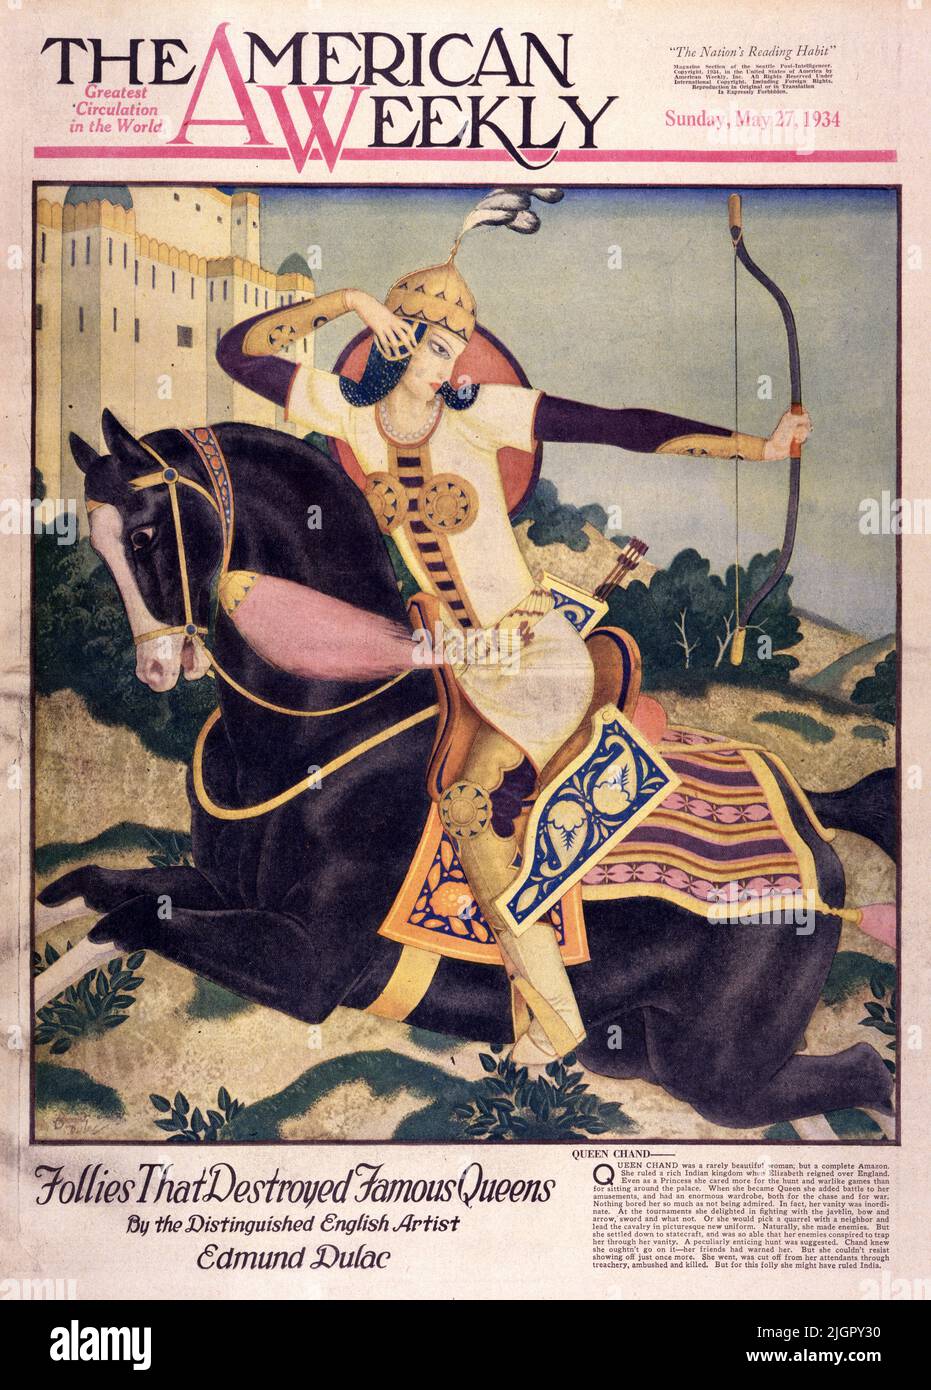 'Queen Chand' published May 27,1934 in the American Weekly magazine painted by Edmund Dulac. Queen Chand was a rarely beautiful woman, but a complete Amazon. She ruled a rich Indian kingdom when Elizabeth reigned over England. Even as a princess she cared more for the hunt and warlike games than sitting around the palace. When she became Queen she added battle to her amusements, and had an enormous wardrobe, both for the chase and for war. Nothing bored so much as not being admired. In fact, her vanity was inordinate.  At the tournament she delighted in fighting with the javelin, bow and arrow Stock Photo